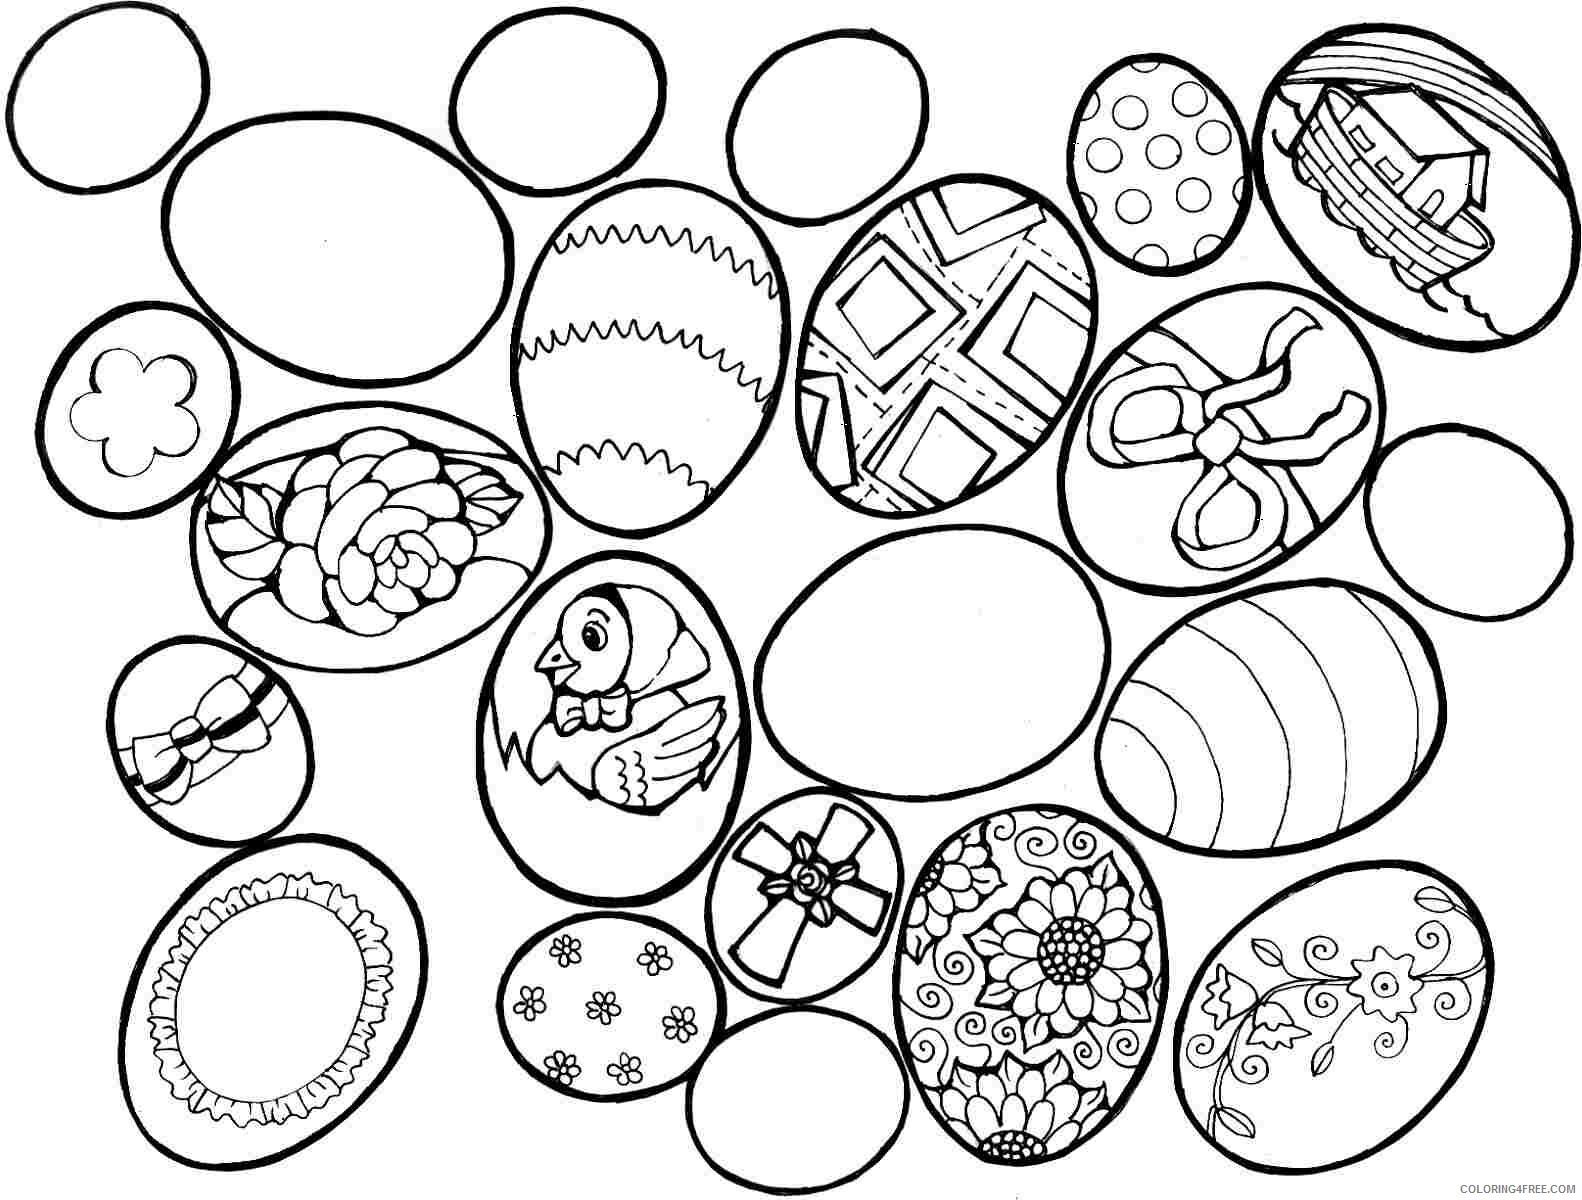 Easter Egg Coloring Pages Holiday Easter Eggs Free Printable 2021 0502 Coloring4free